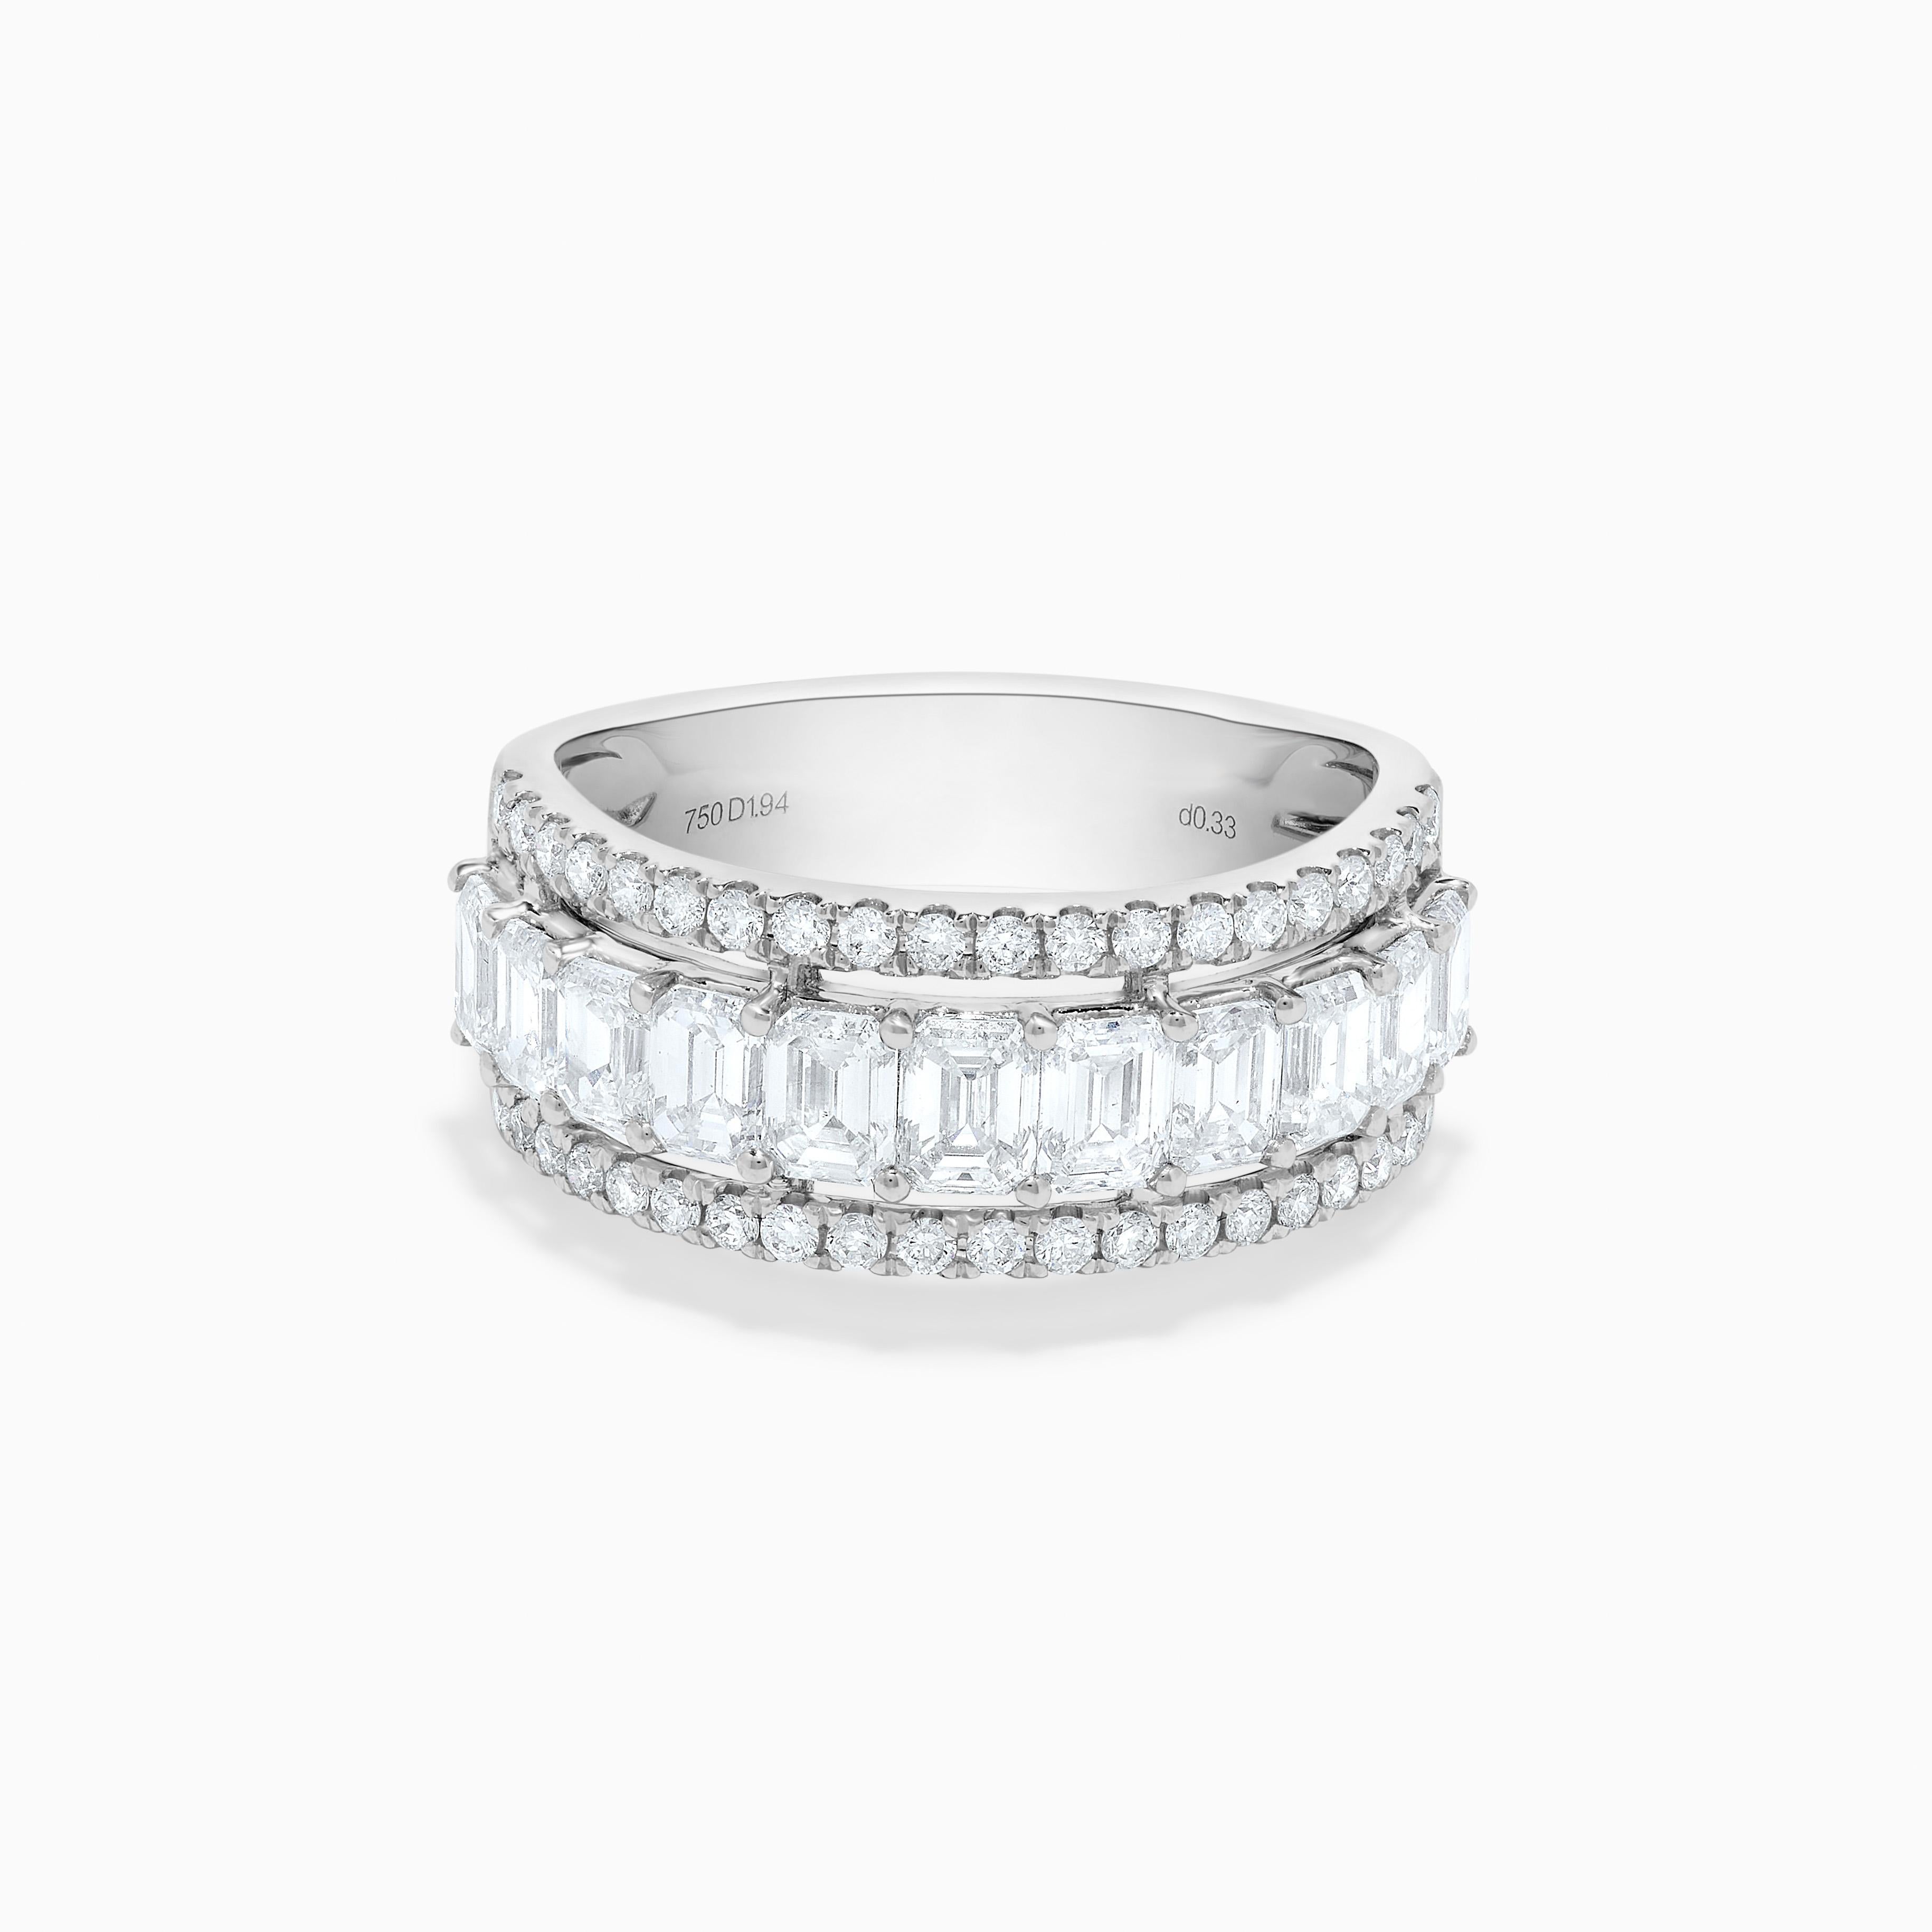 RareGemWorld's classic diamond band. Mounted in a beautiful 18K White Gold setting with natural emerald cut white diamonds surrounded by natural round cut white diamonds. This band is guaranteed to impress and enhance your personal collection!
Total